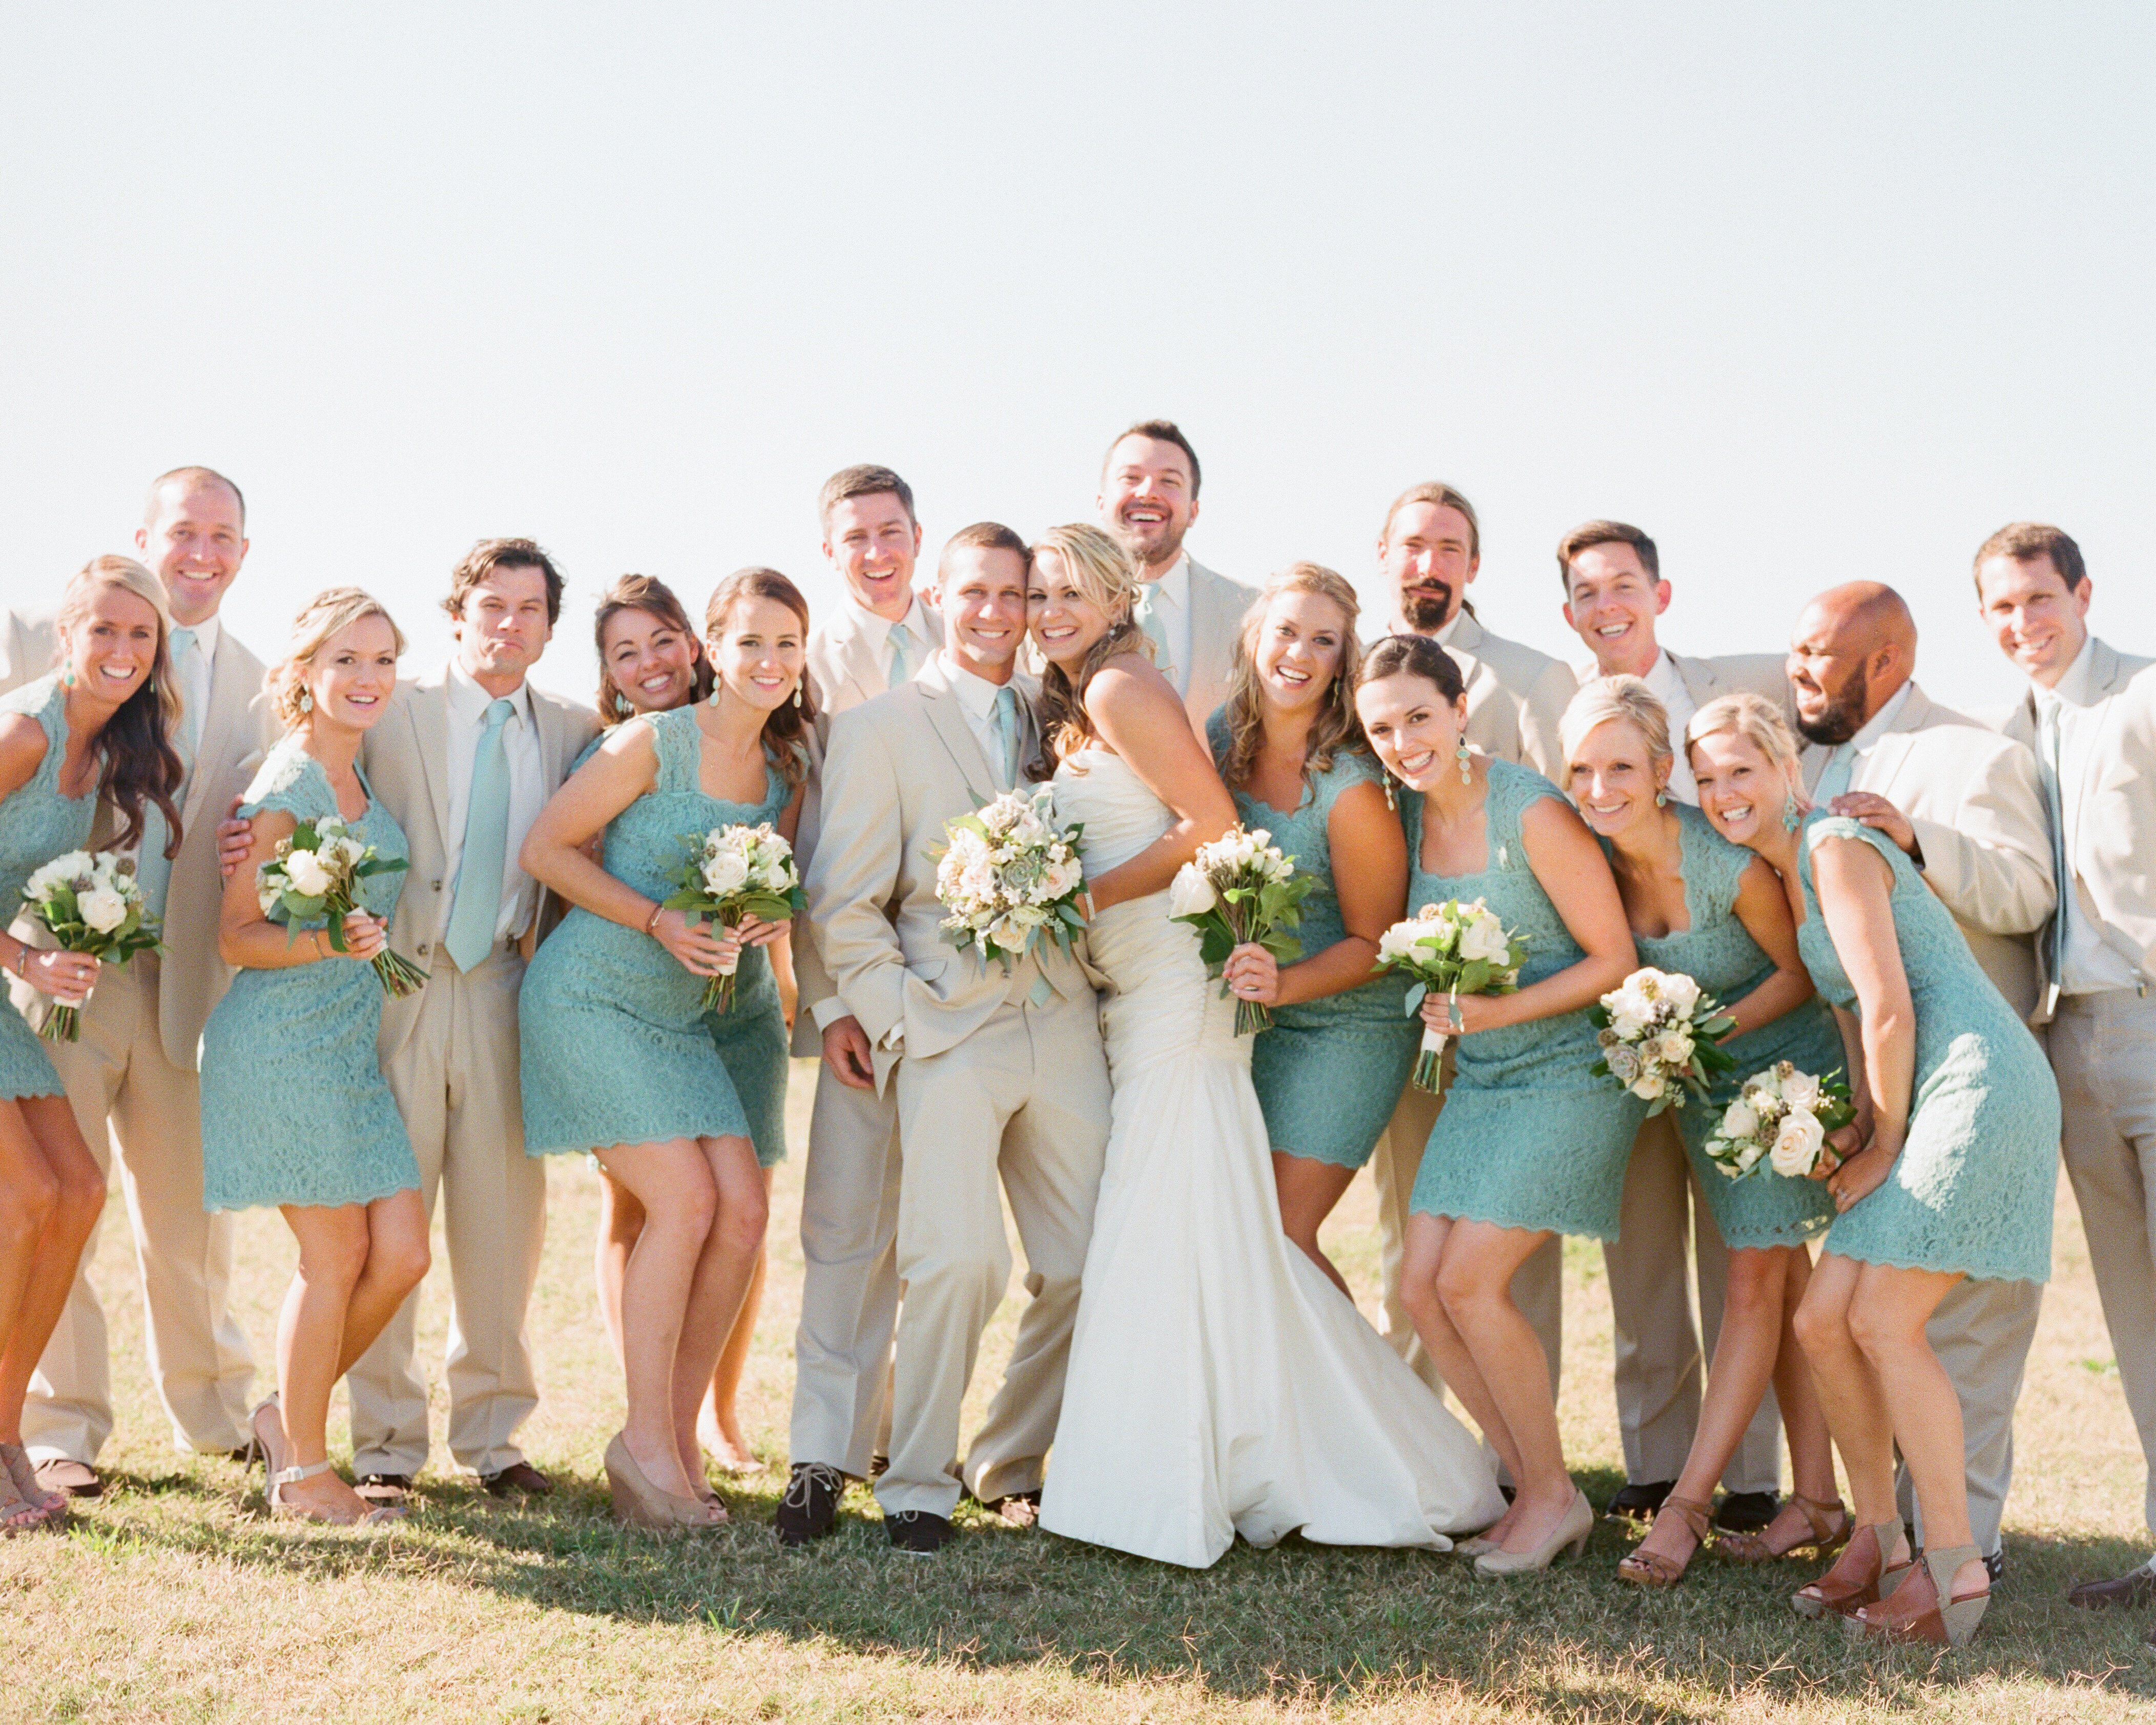 19+ New Beach Wedding Pictures Bridal Party